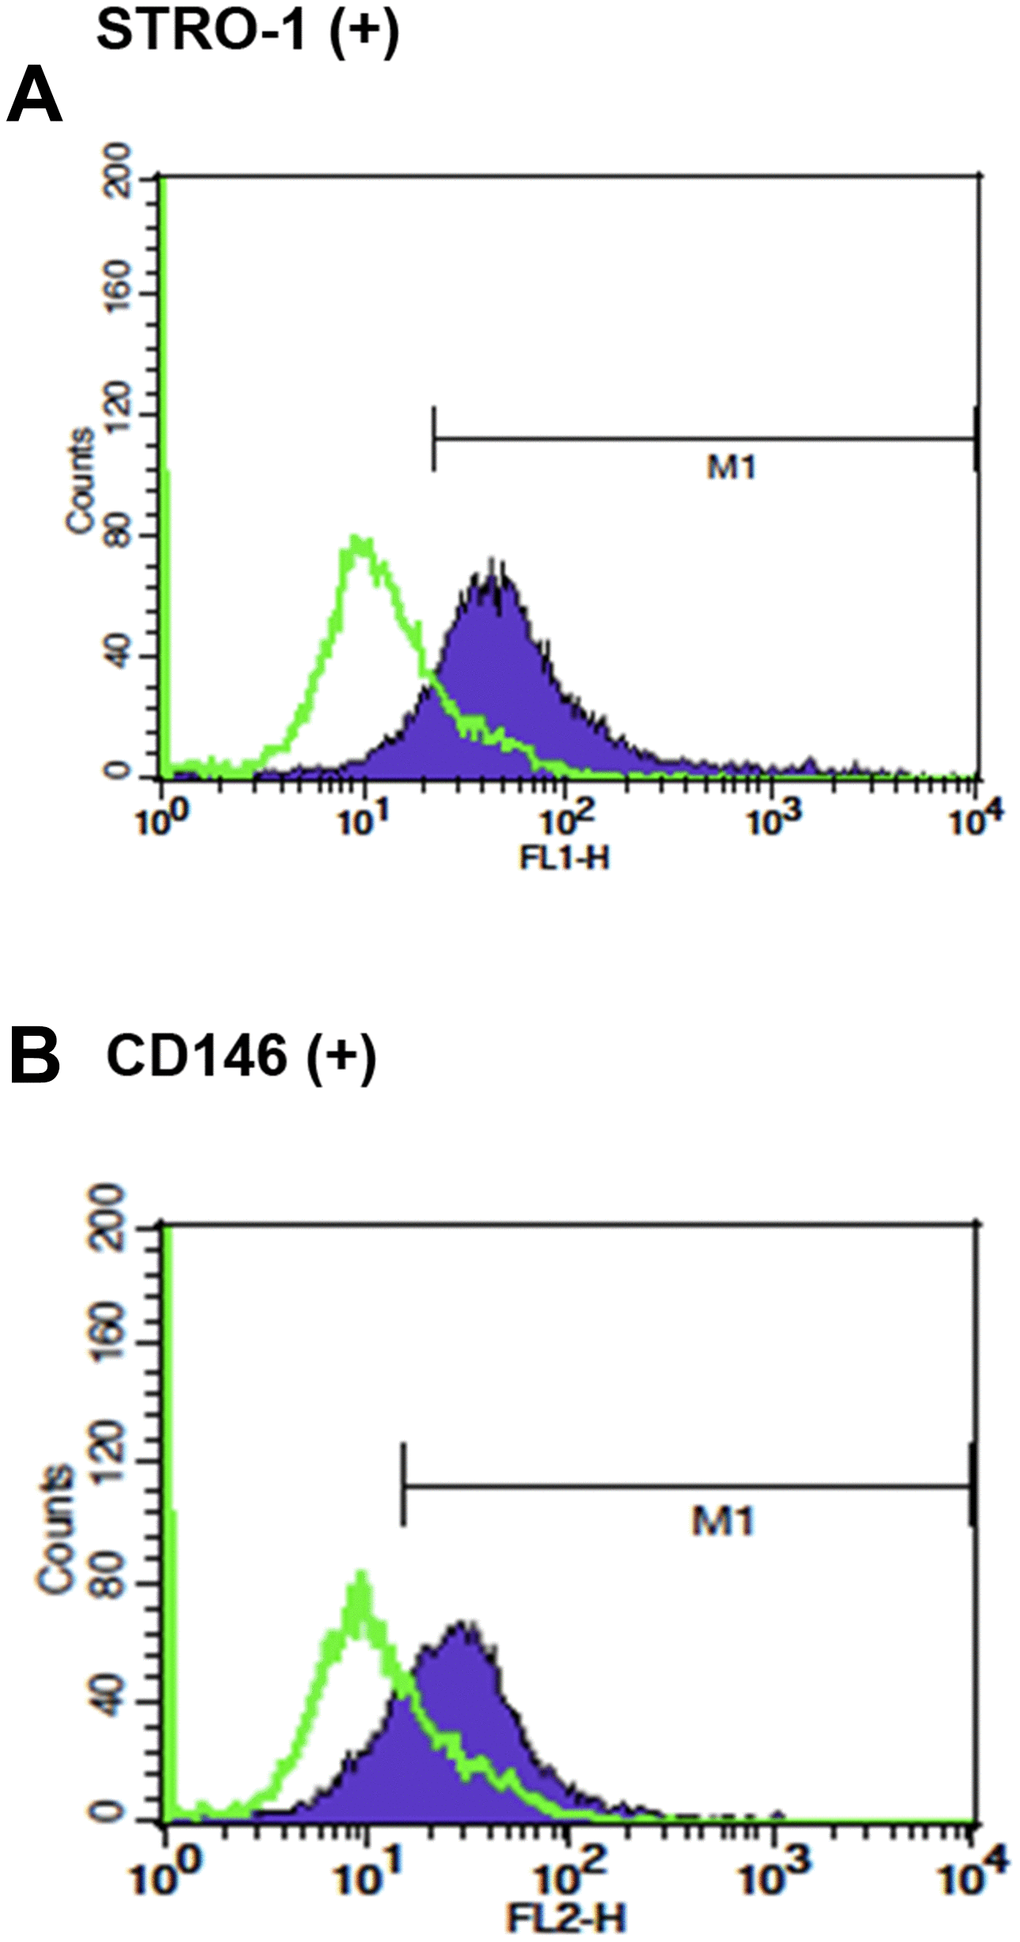 The stem cell characteristics of SHED. (A) Expression of STRO-1 and (B) expression of CD146 in cultured SHED. One representative picture of flow cytometric analysis data was shown.